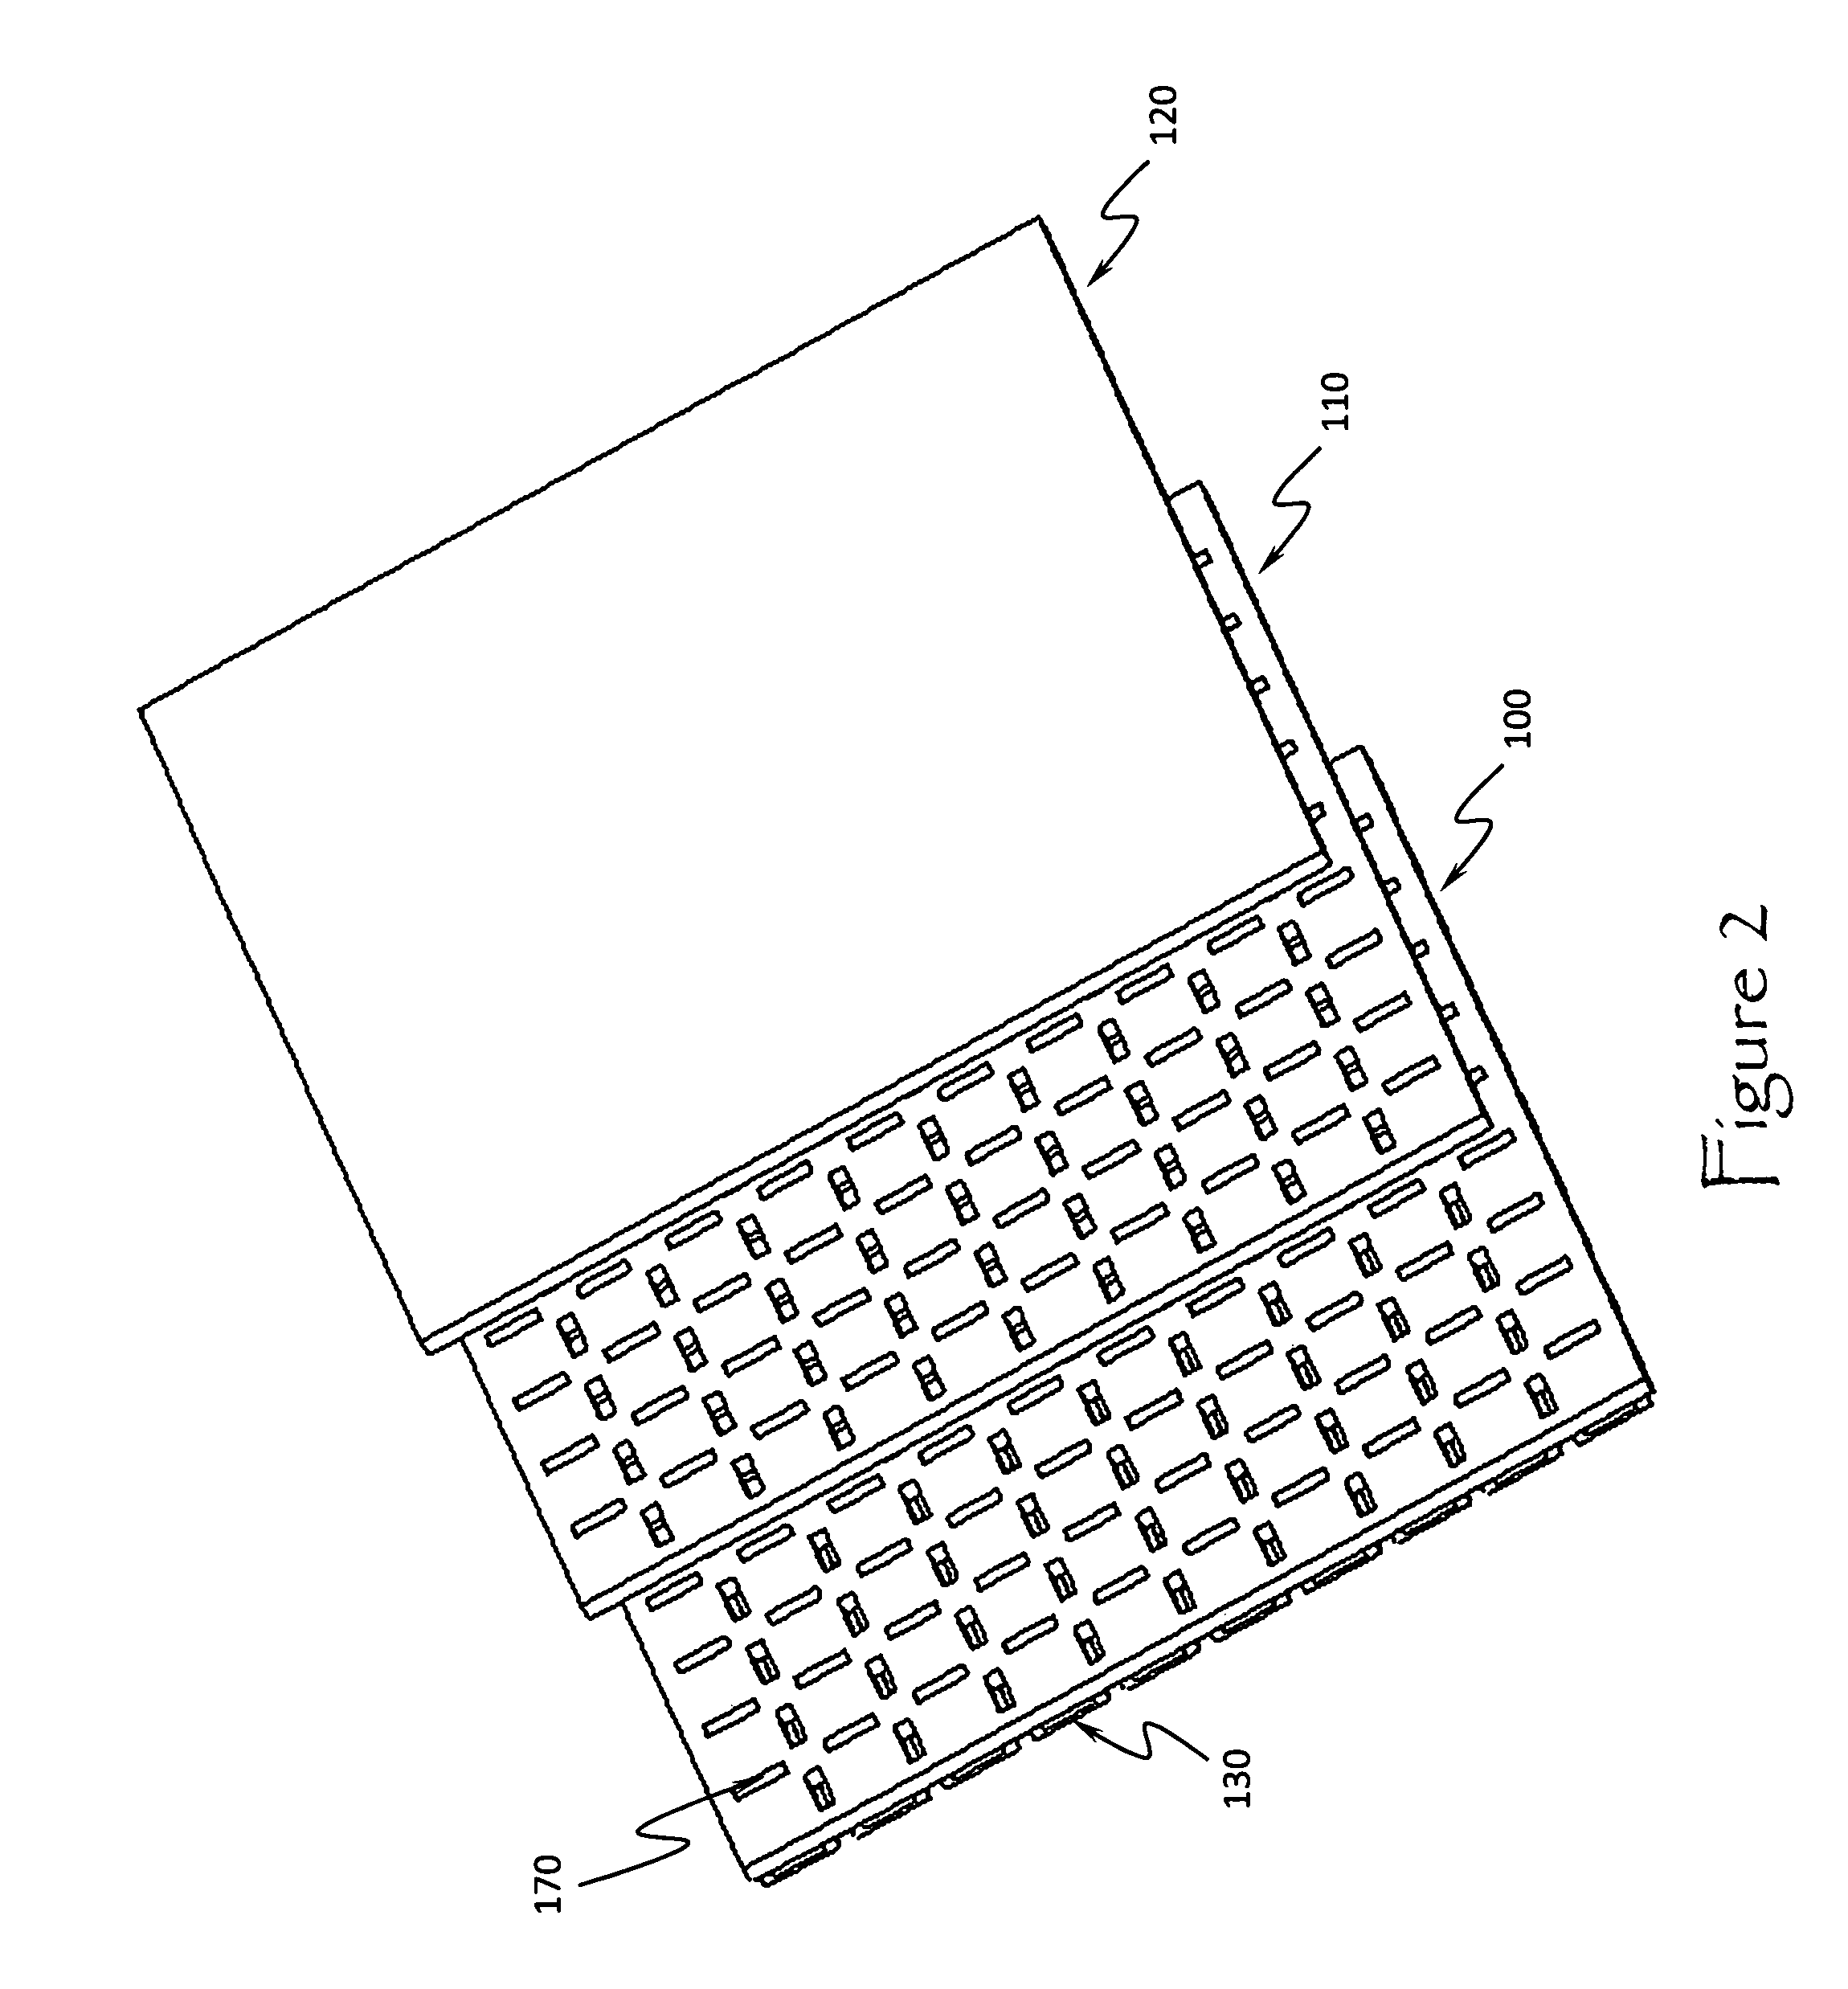 Dynamically reconfigurable feed network for multi-element planar array antenna